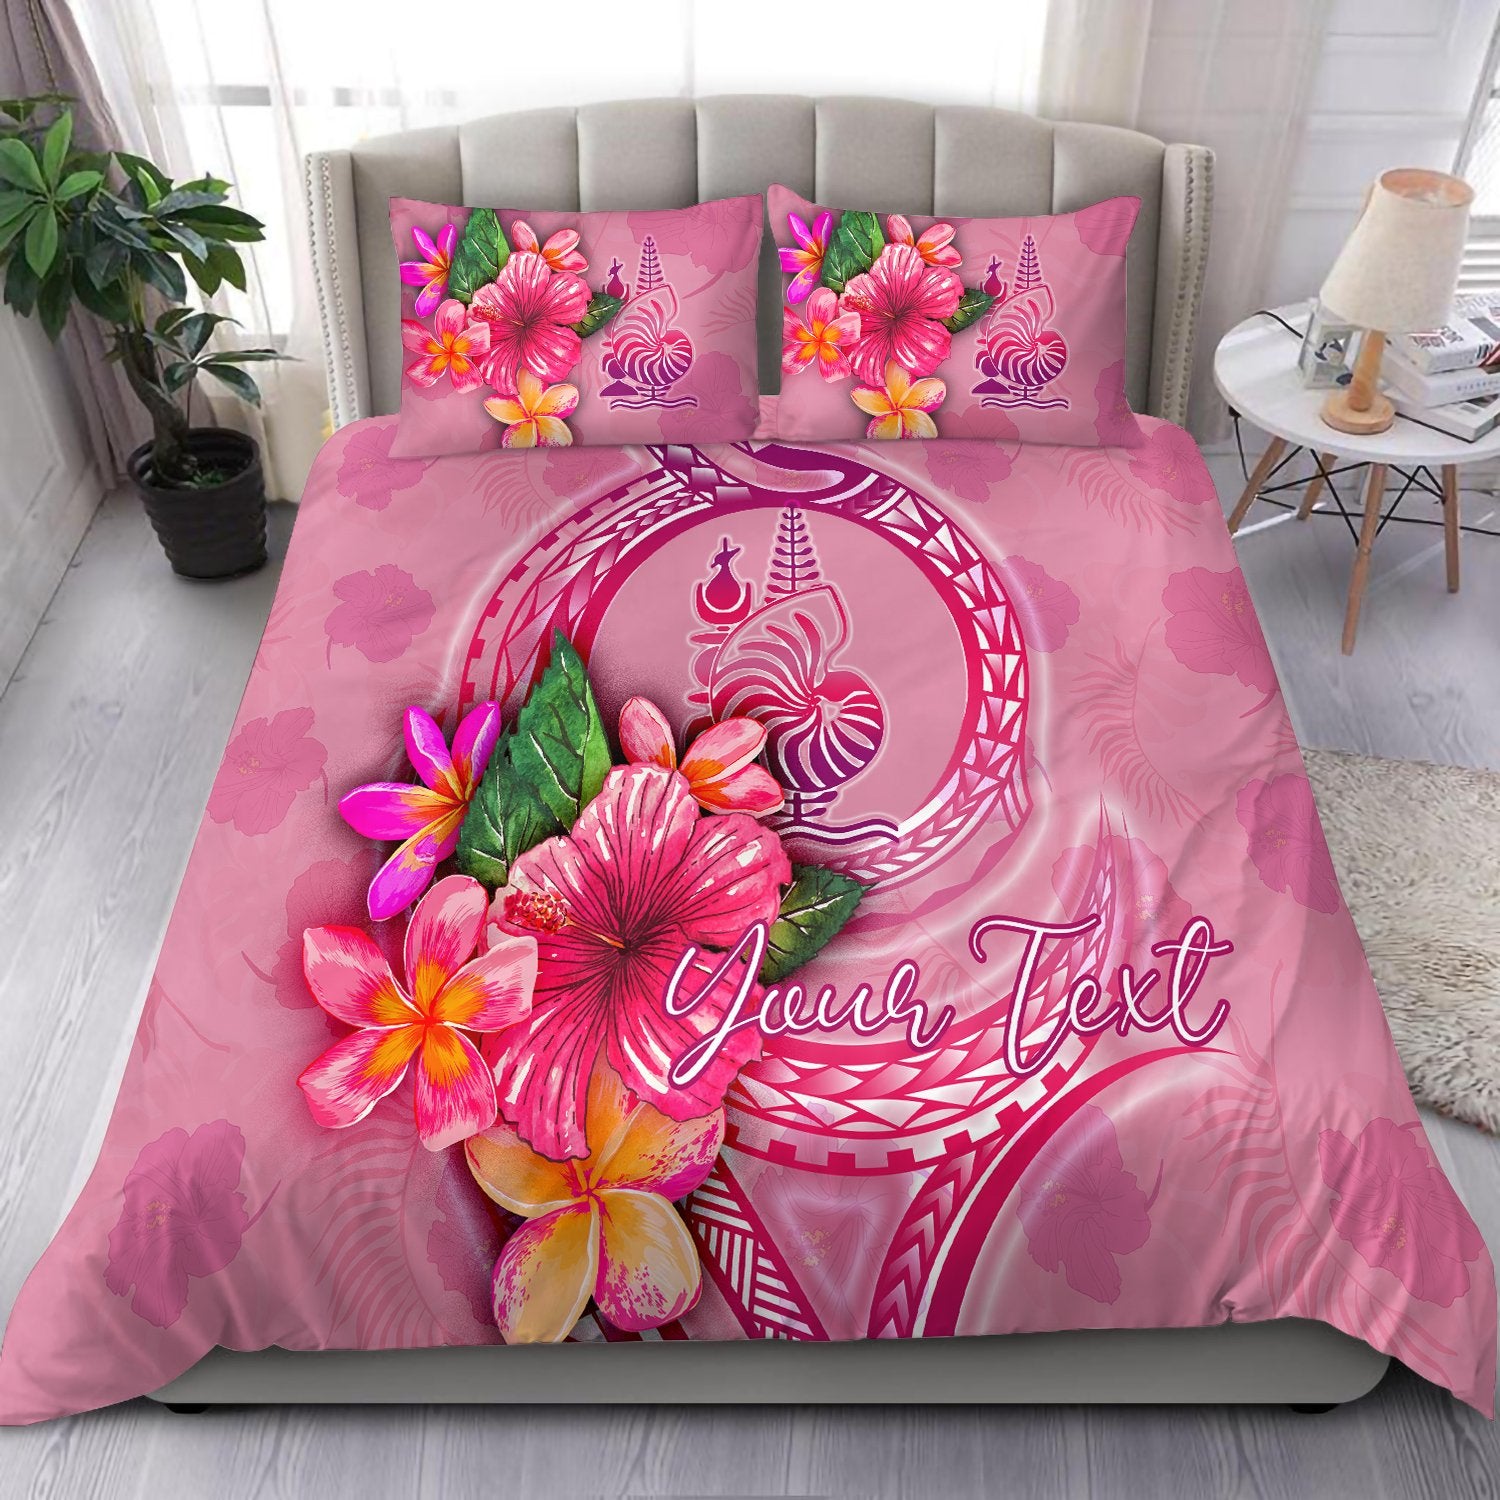 New Caledonia Polynesian Custom Personalised Bedding Set - Floral With Seal Pink pink - Polynesian Pride